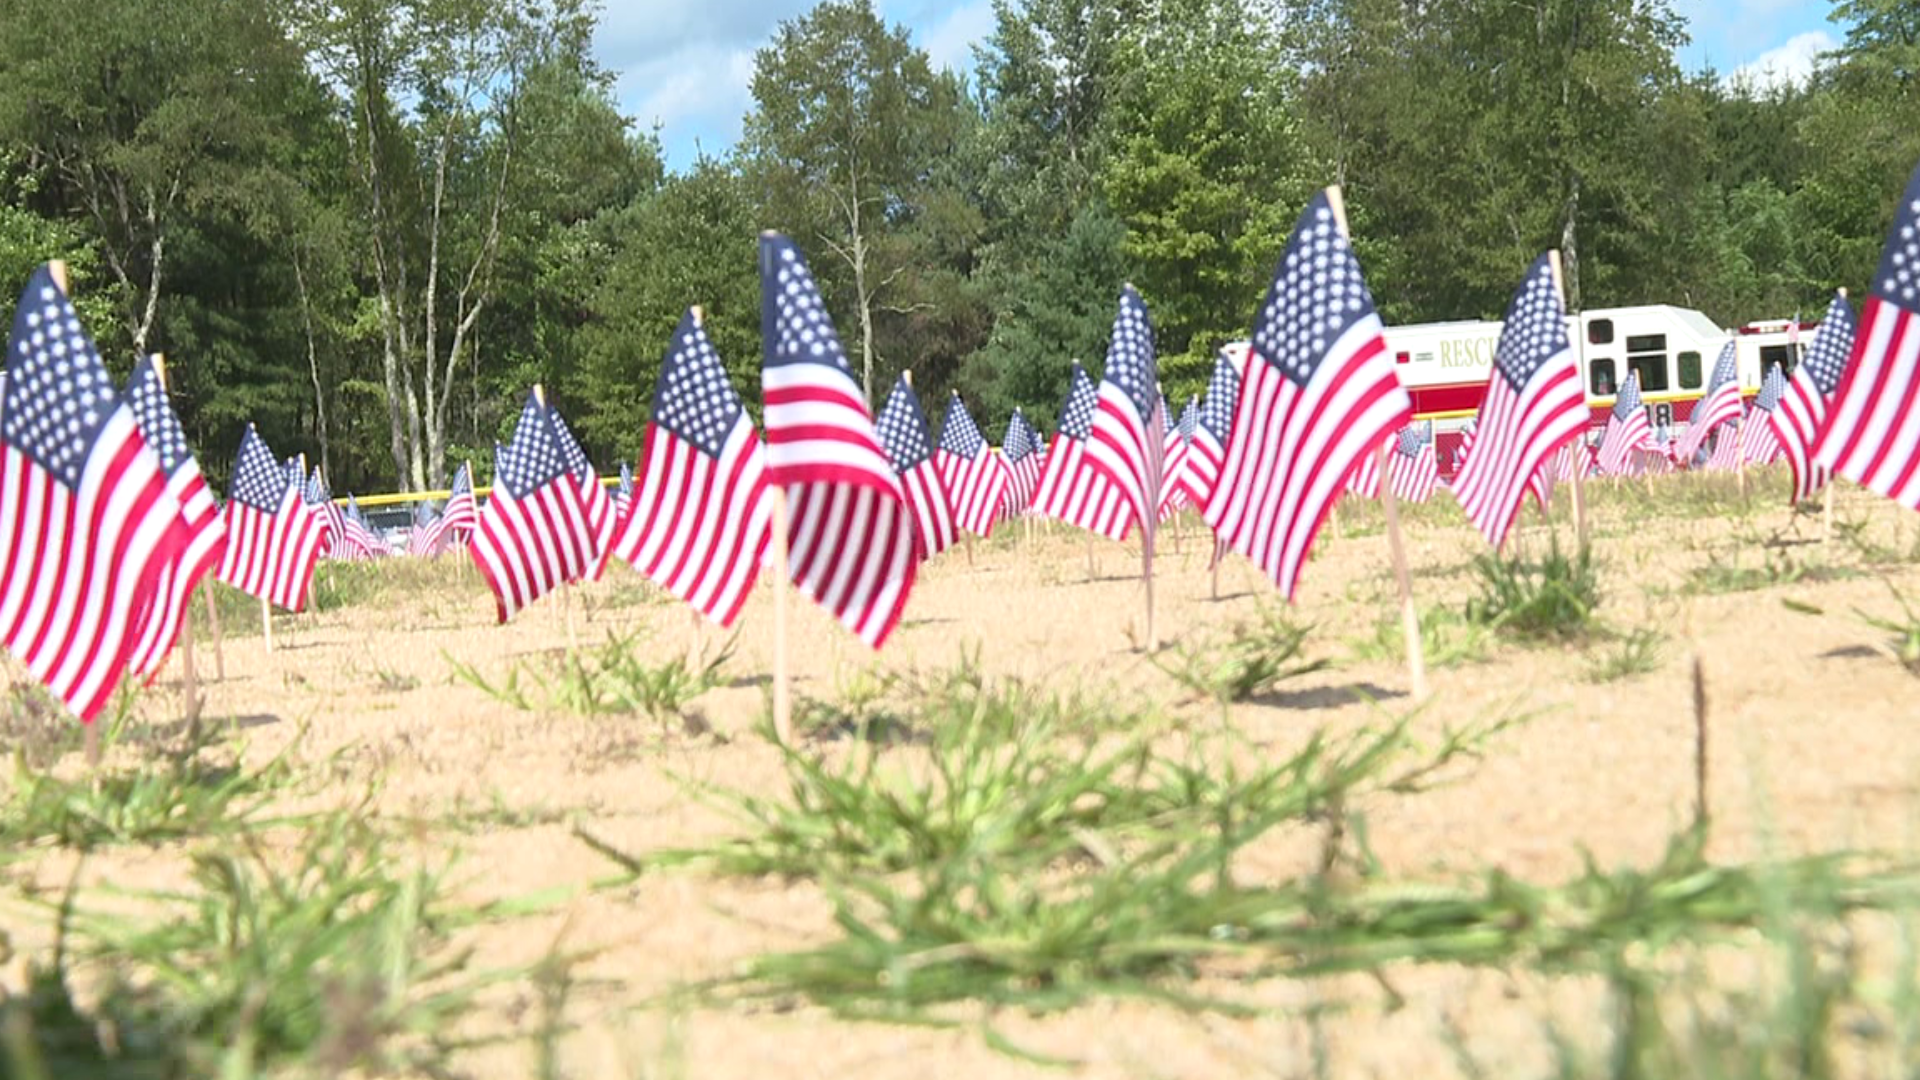 Nearly 3,000 flags line a baseball field, symbolizing every person lost in the 9/11 attacks.